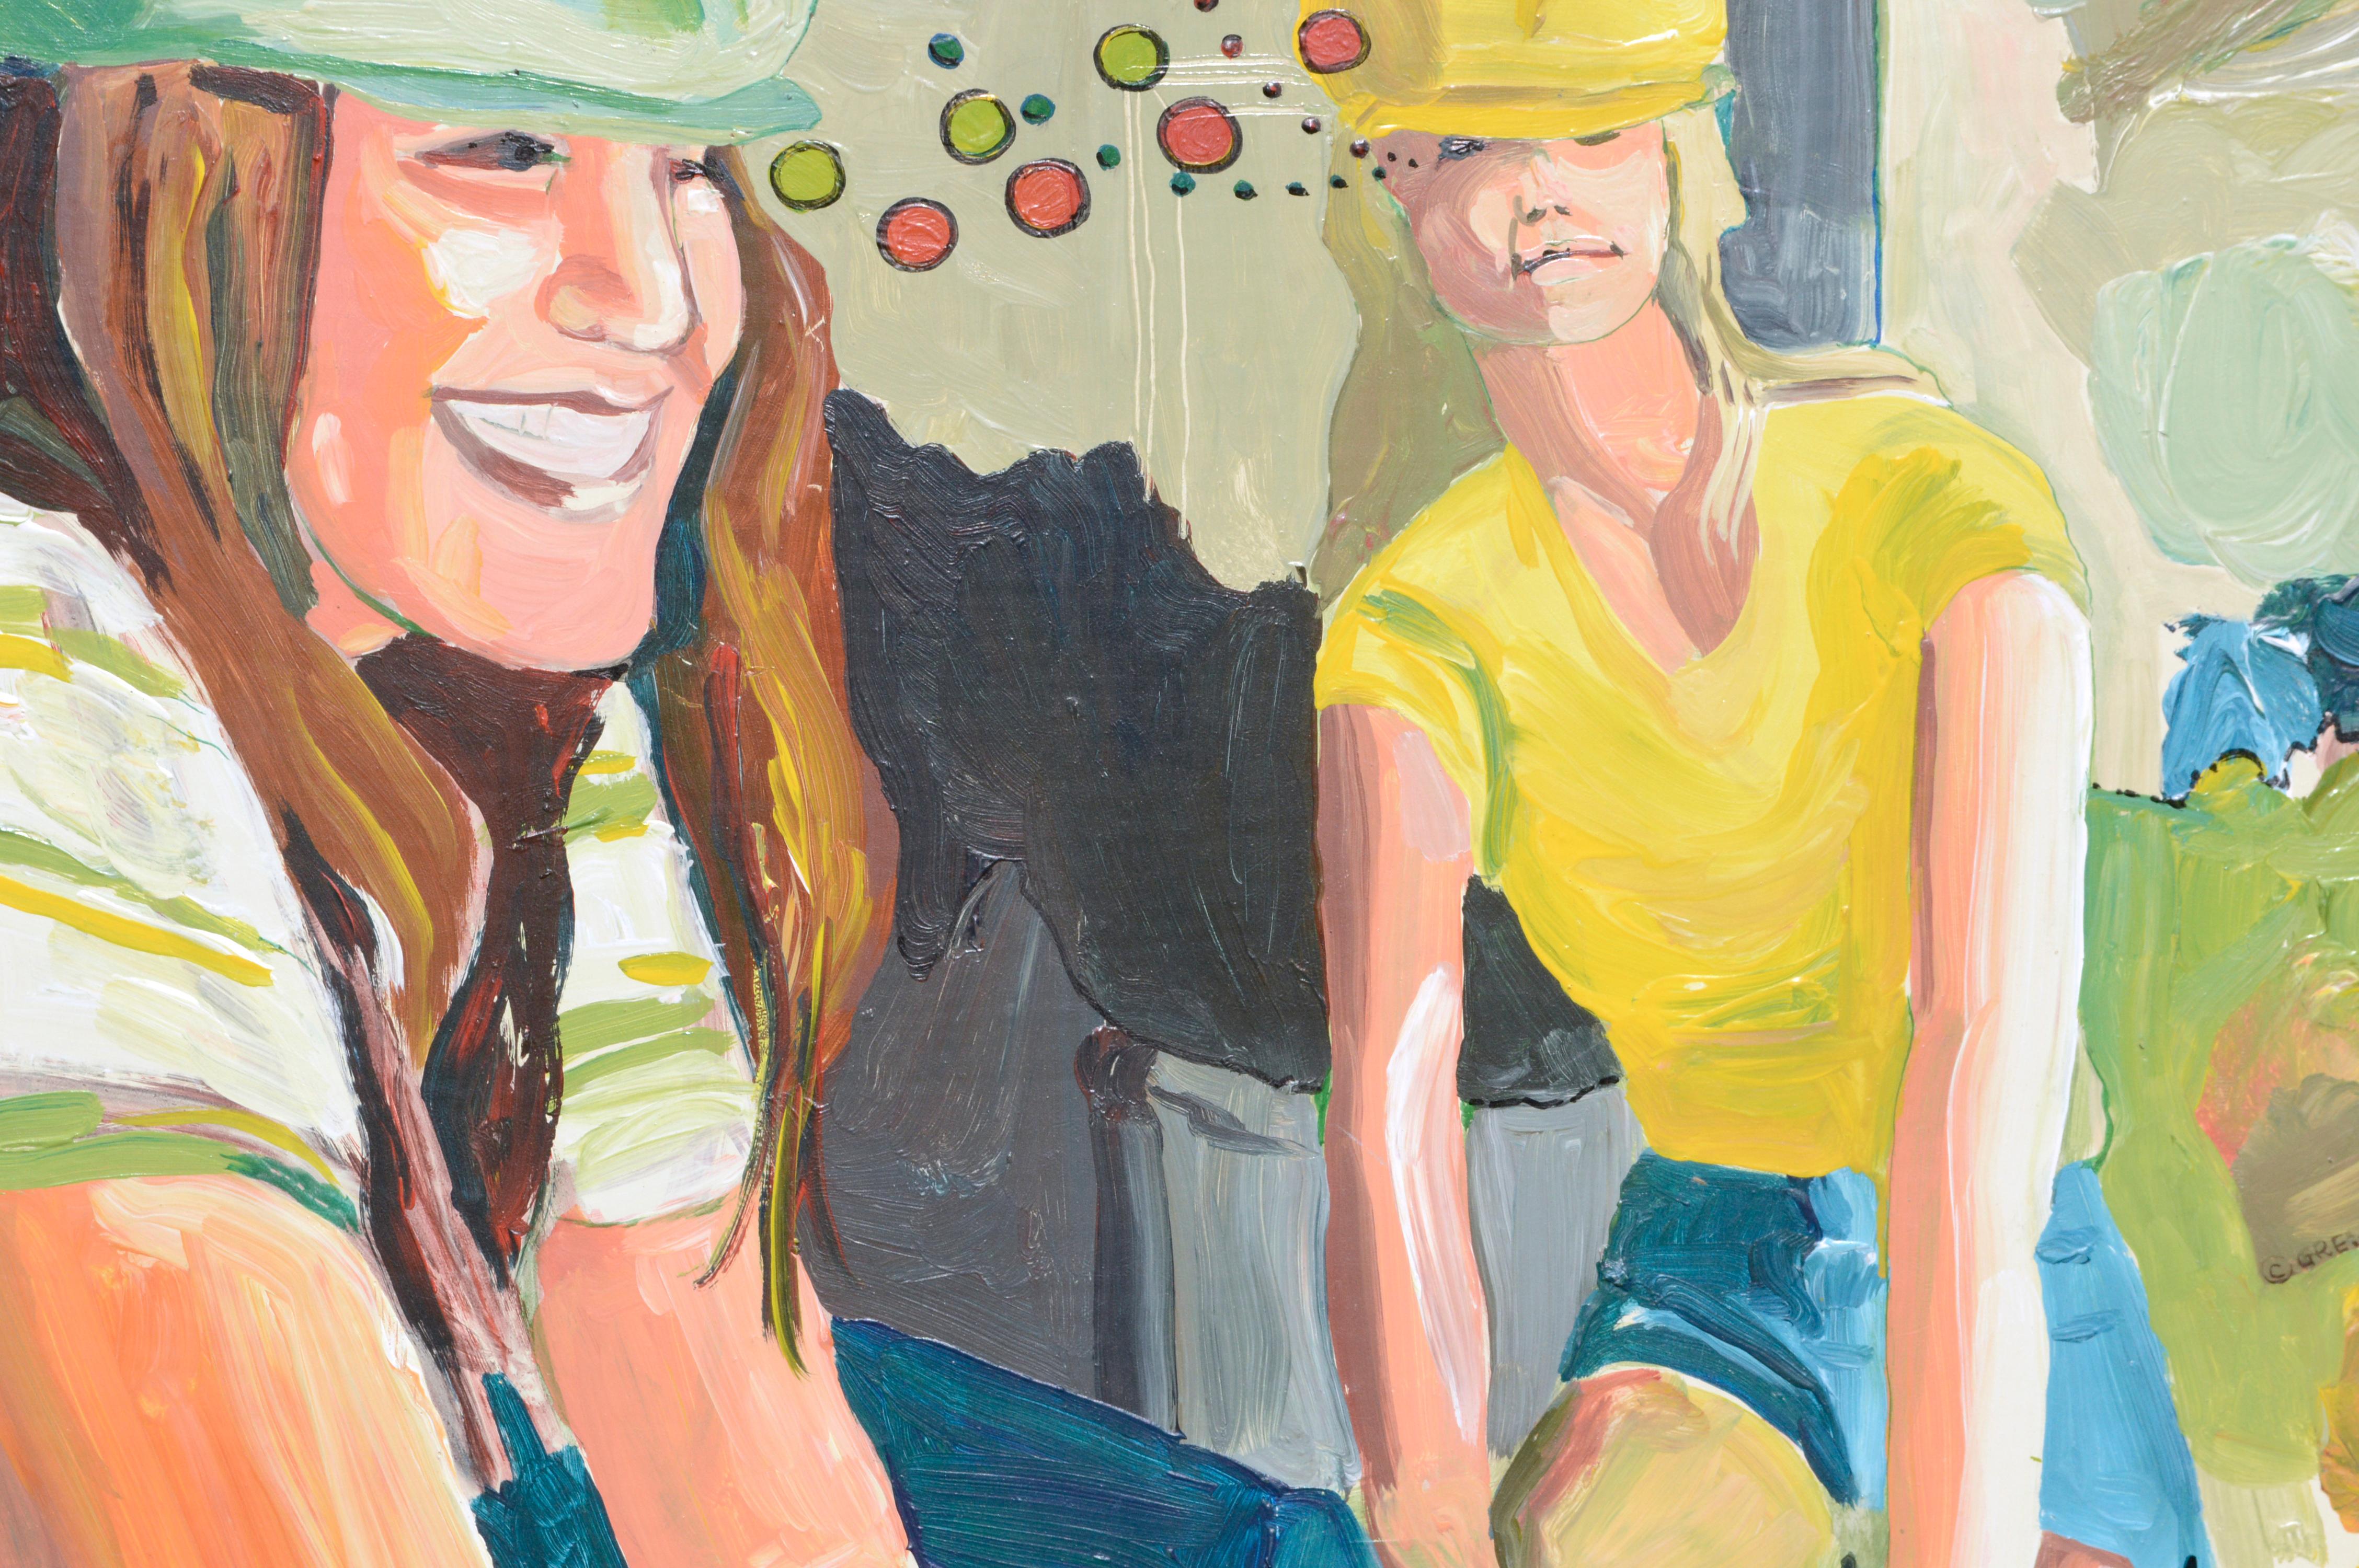 Cyclists in Love, Bay Area Figurative Movement - Brown Interior Painting by Patricia Gren Hayes